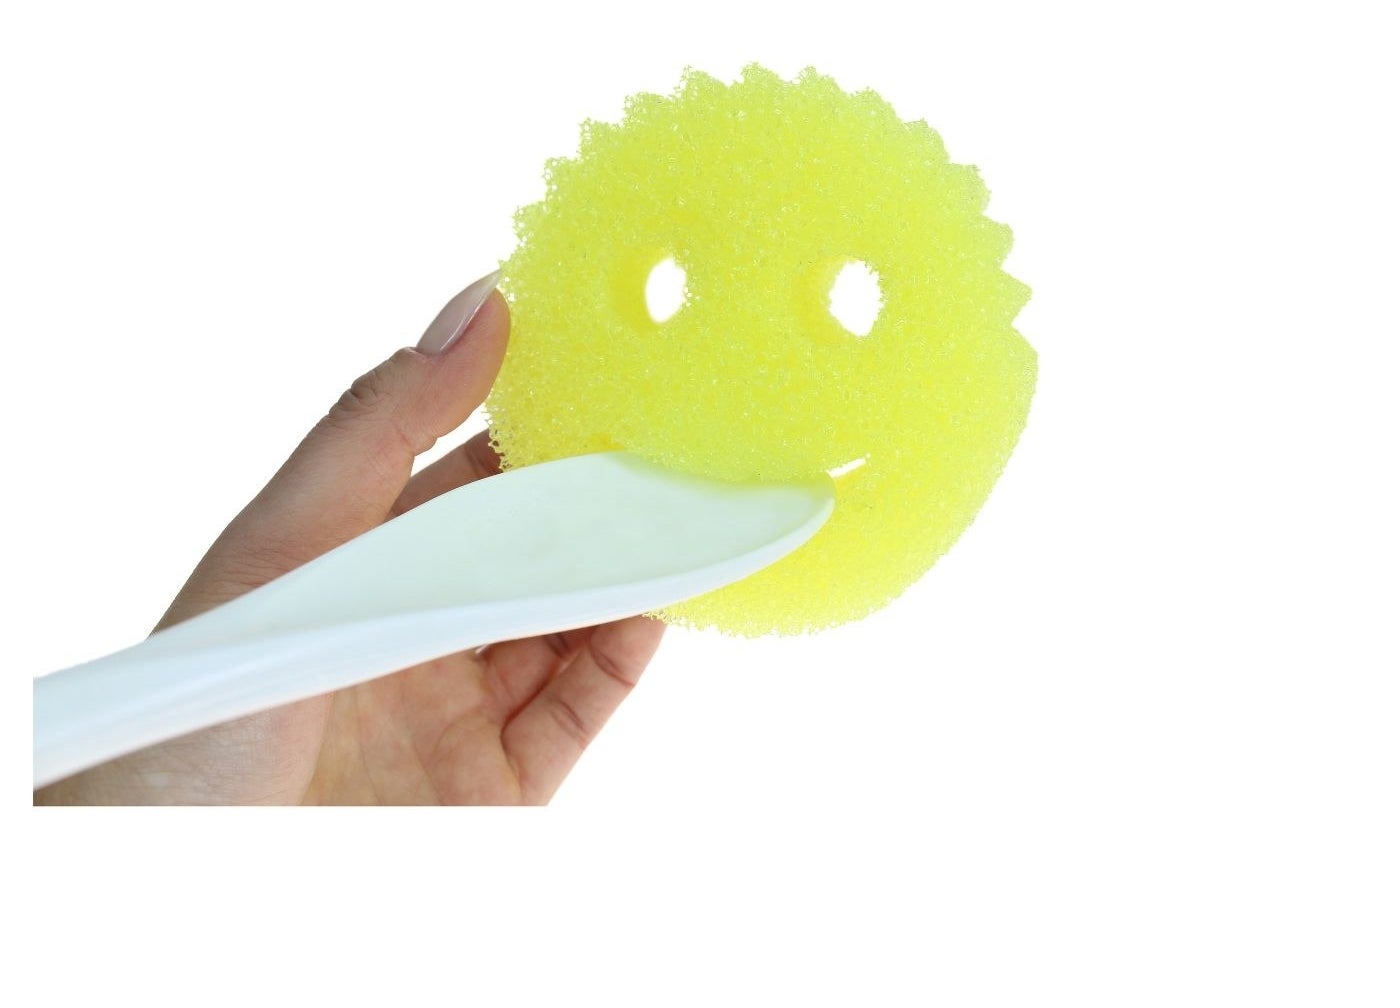 a model holding the yellow smiley face shaped scrubber and a spoon